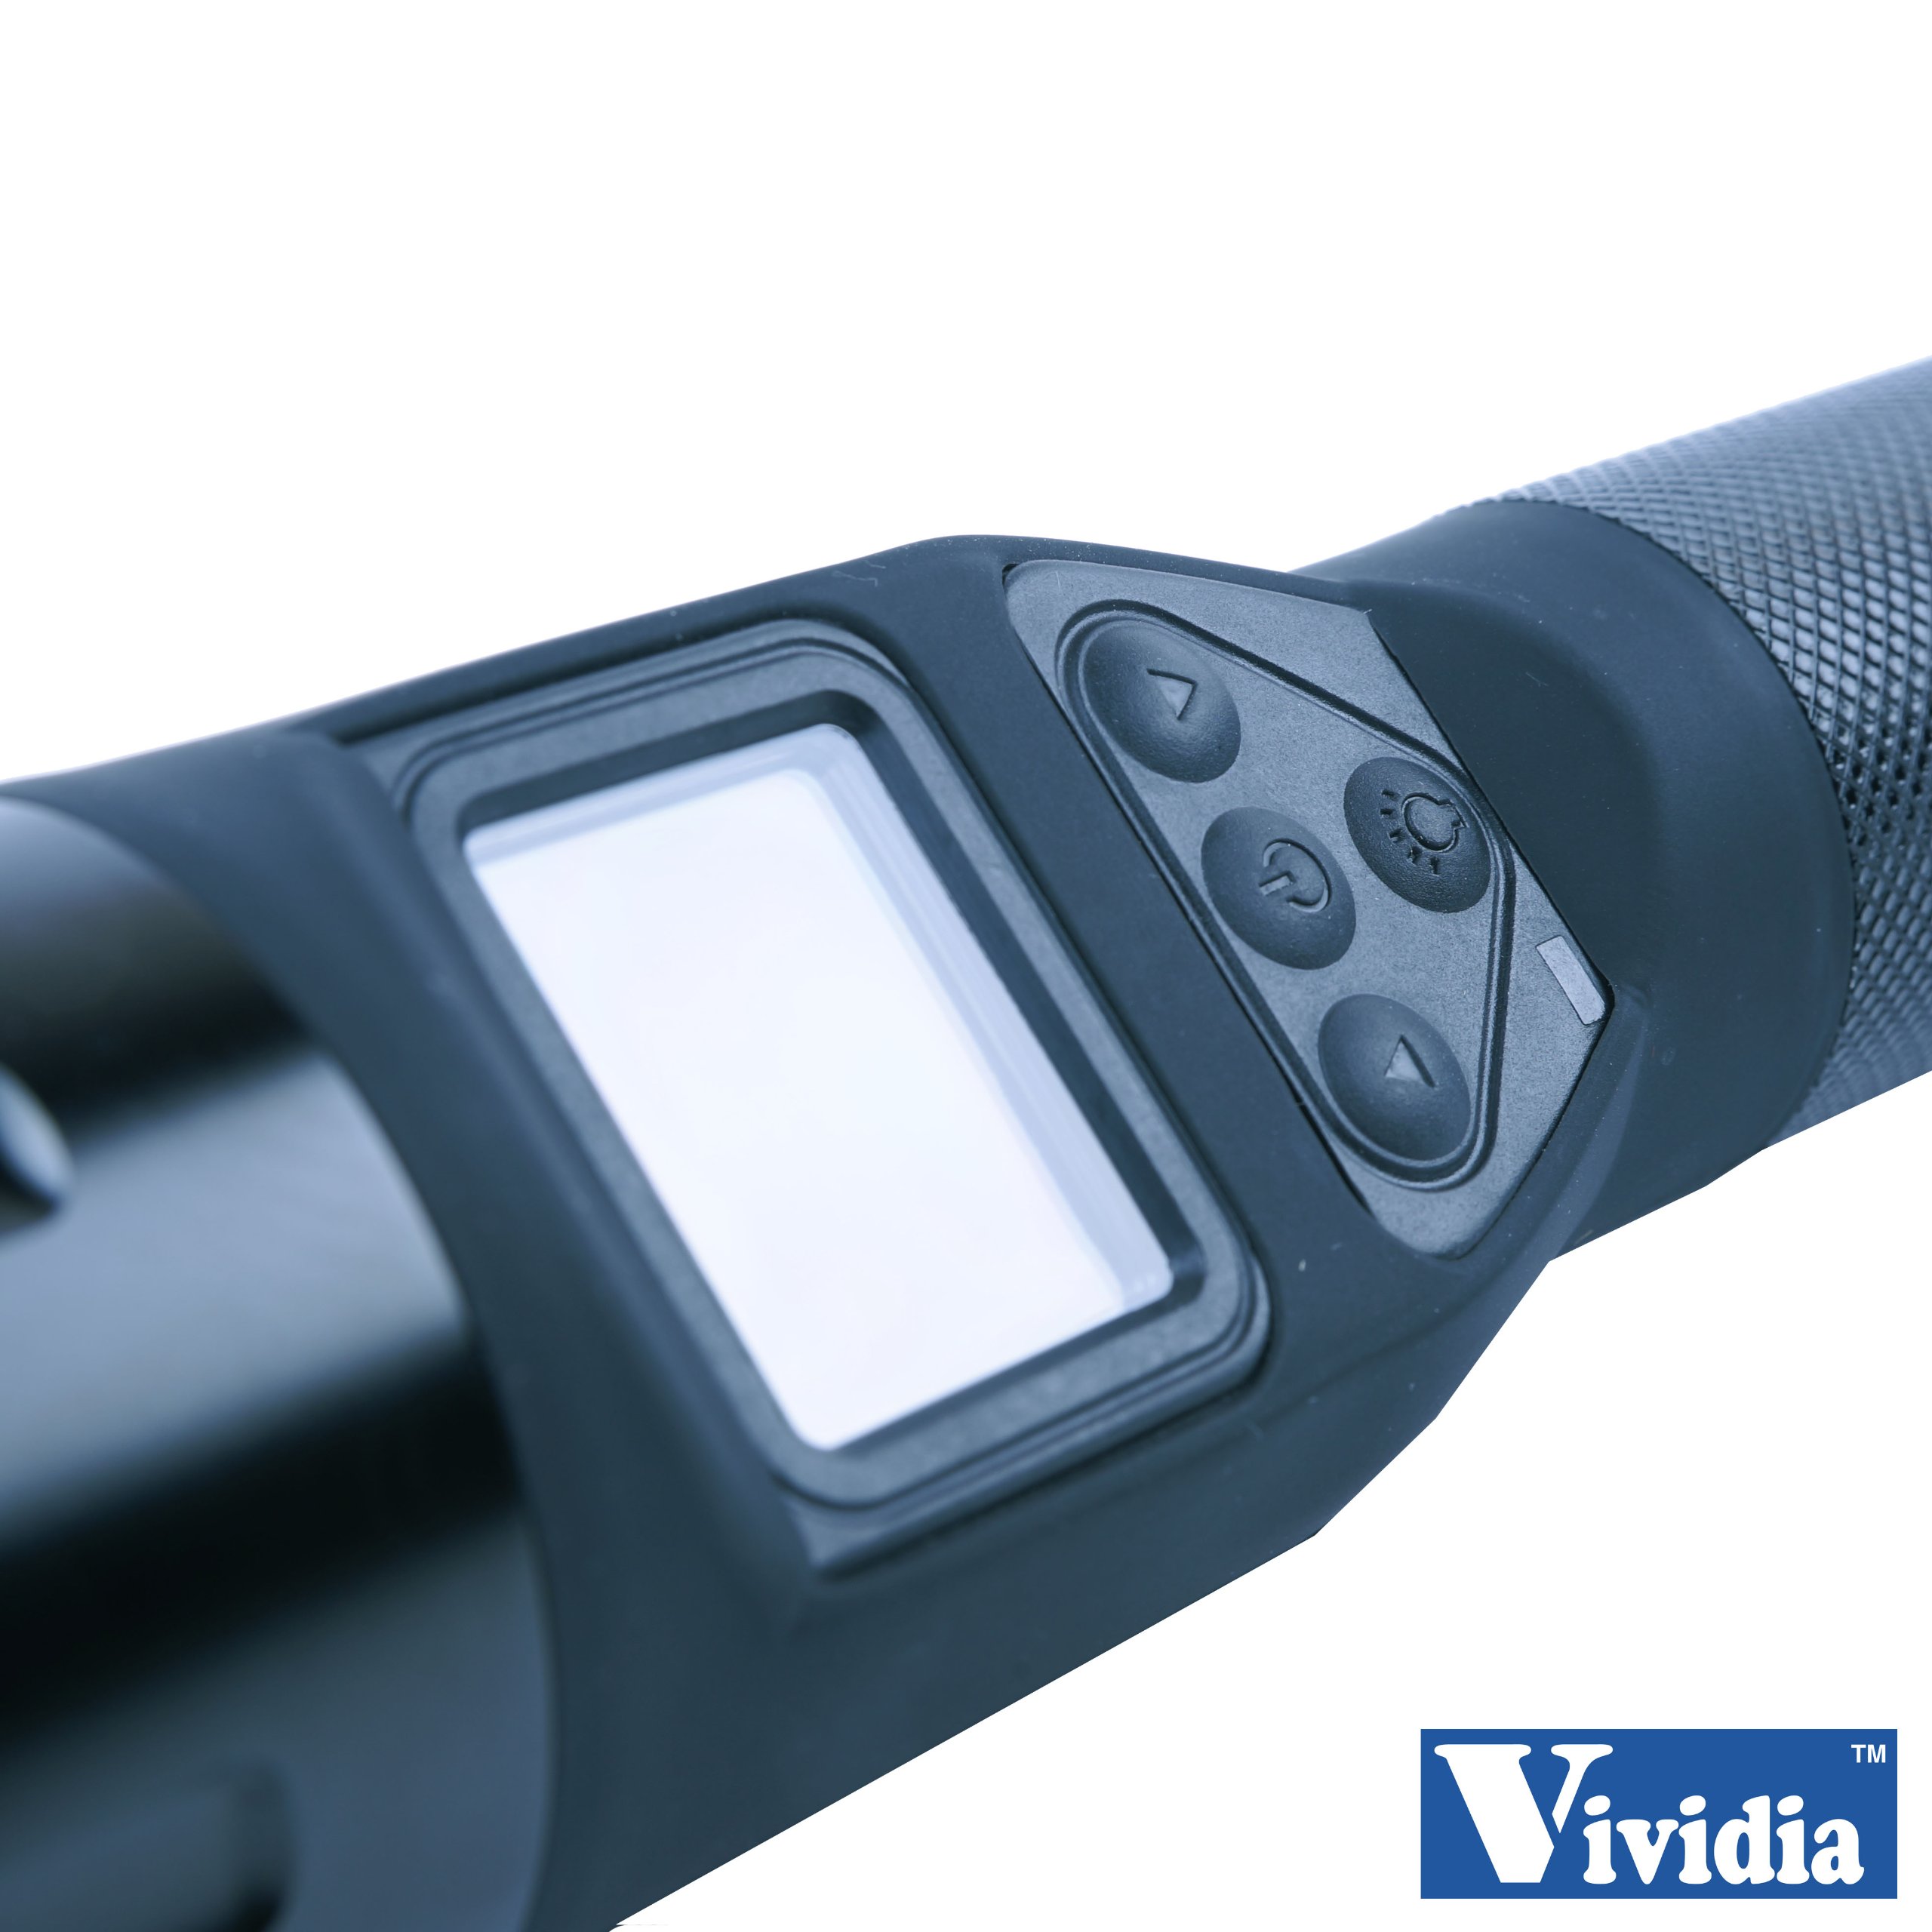 Vividia Waterproof LED Flashlight DVR Inspection Camera with Photo/Video/Audio Recordable Capability and 1.5” LCD Monitor